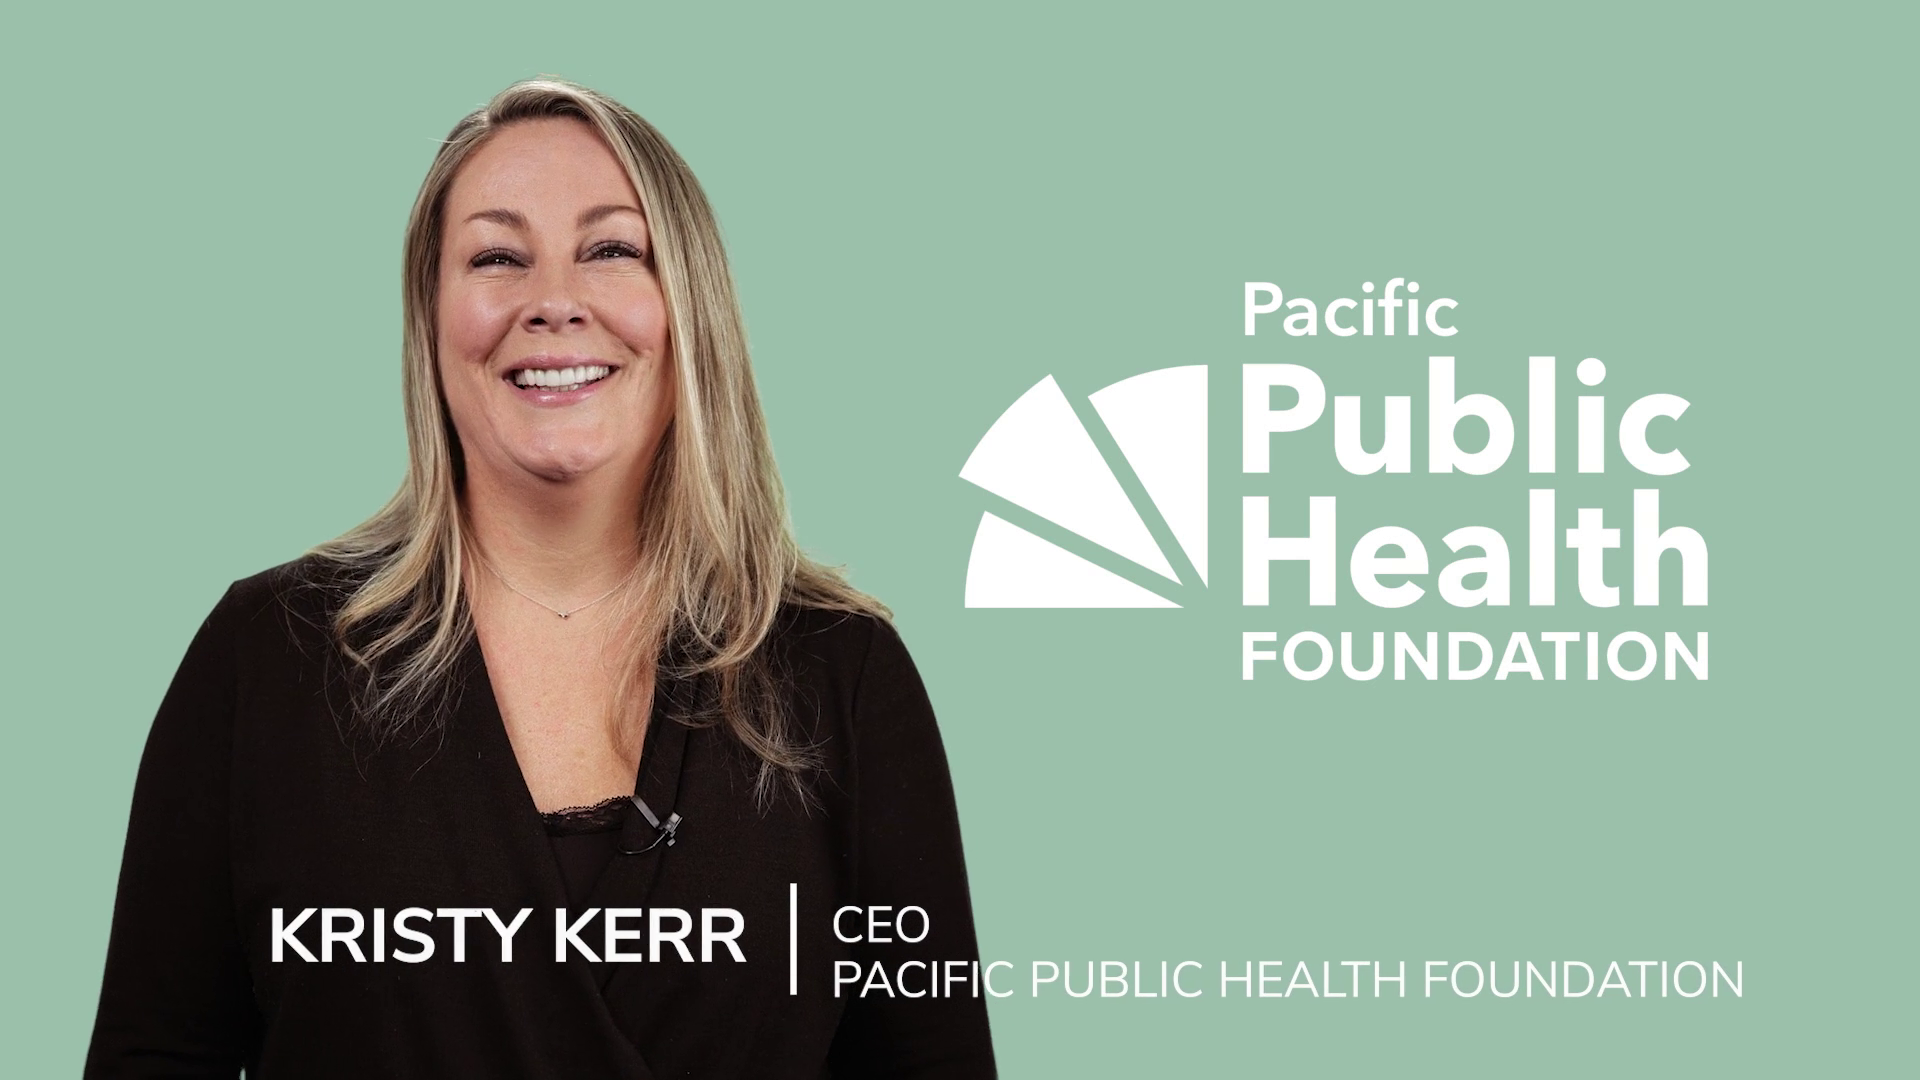 Pacific Public Health Foundation introductory video